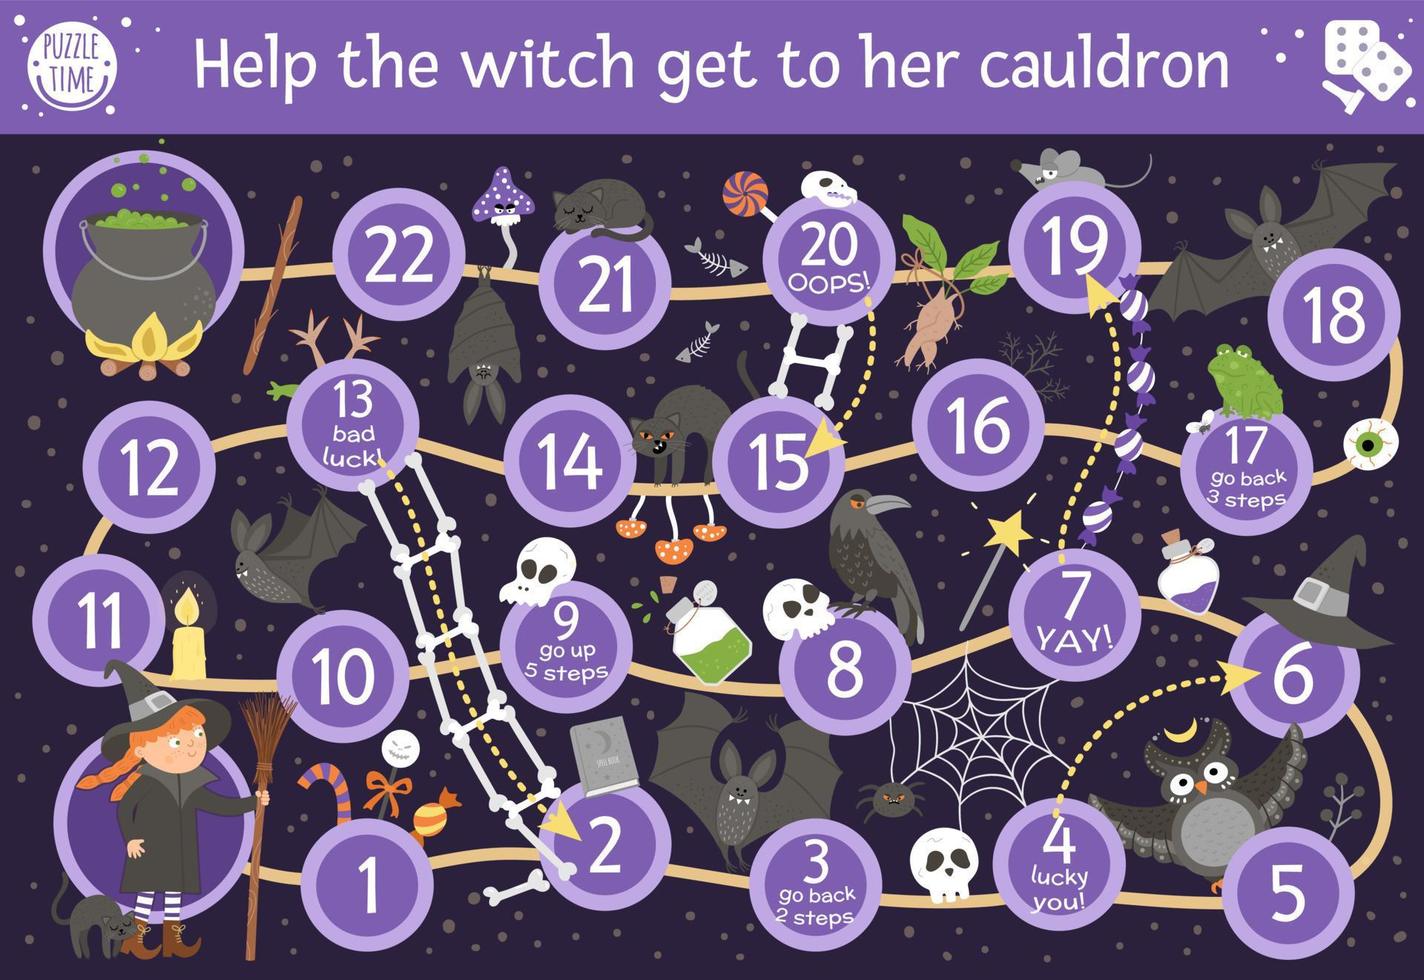 Halloween board game for children with cute witch and scary animals. Educational boardgame with bat, broom, black cat, spider. Help the witch get to her cauldron. Funny printable activity. vector